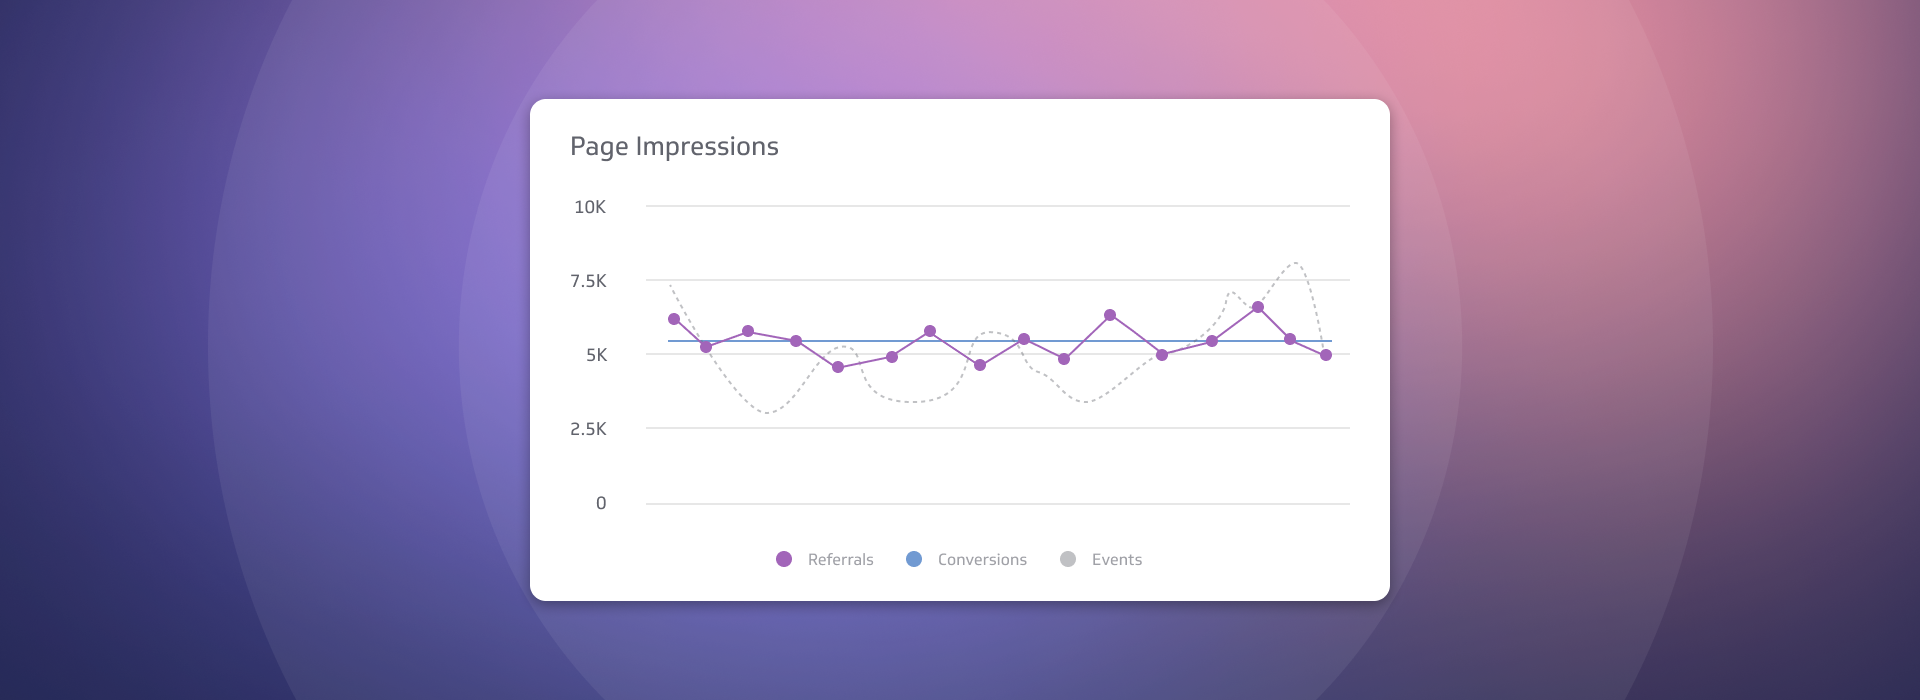 Facebook Page Impressions